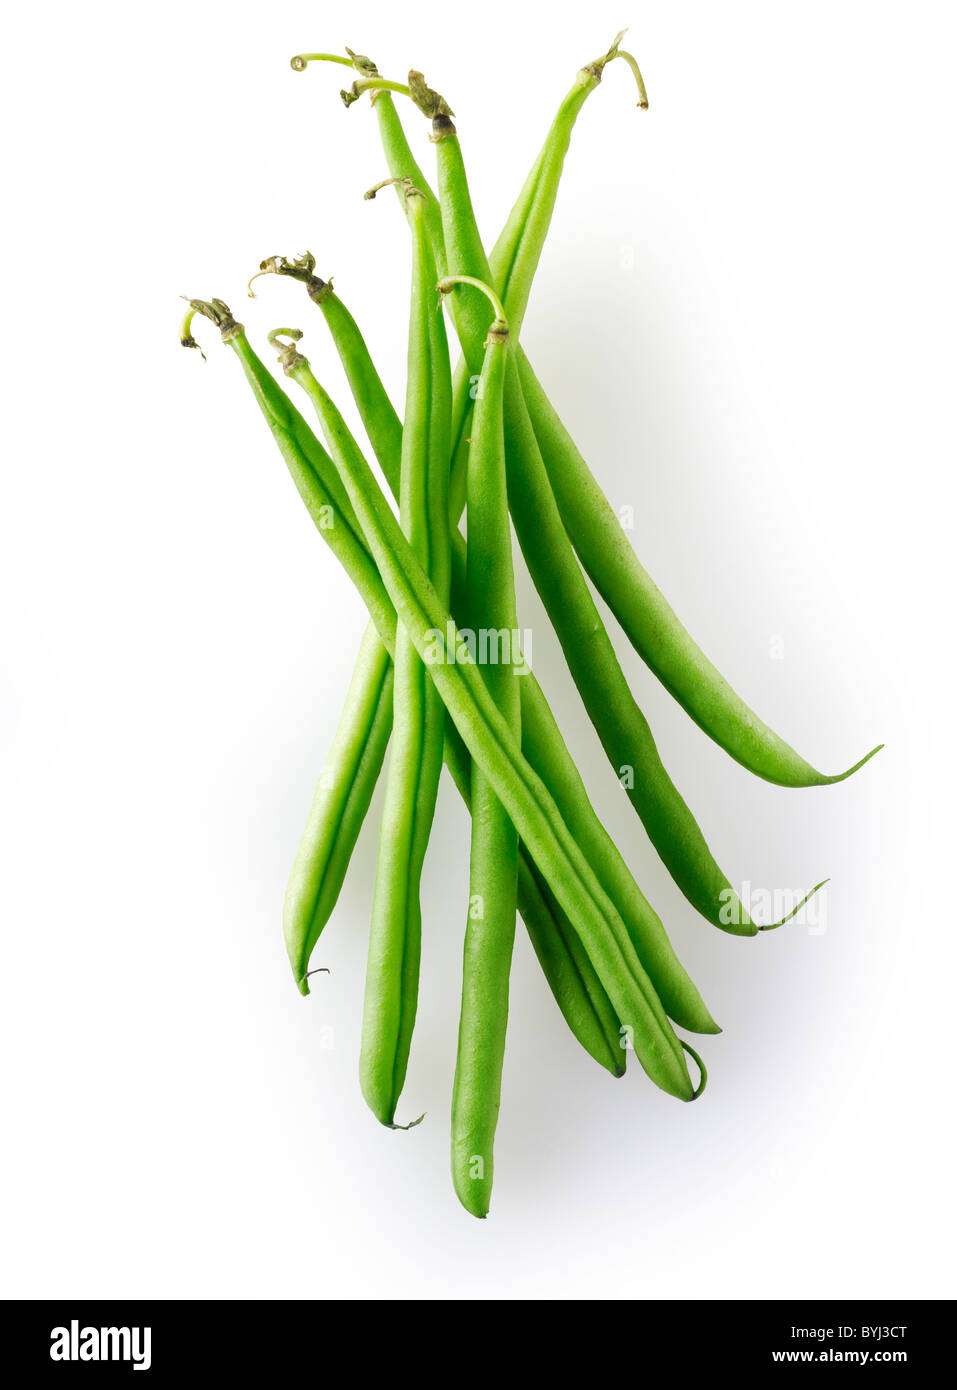 Fresh picked green beans, uncooked and ready to prepare, known as fine beans, haricot vert, french beans. cut out Stock Photo